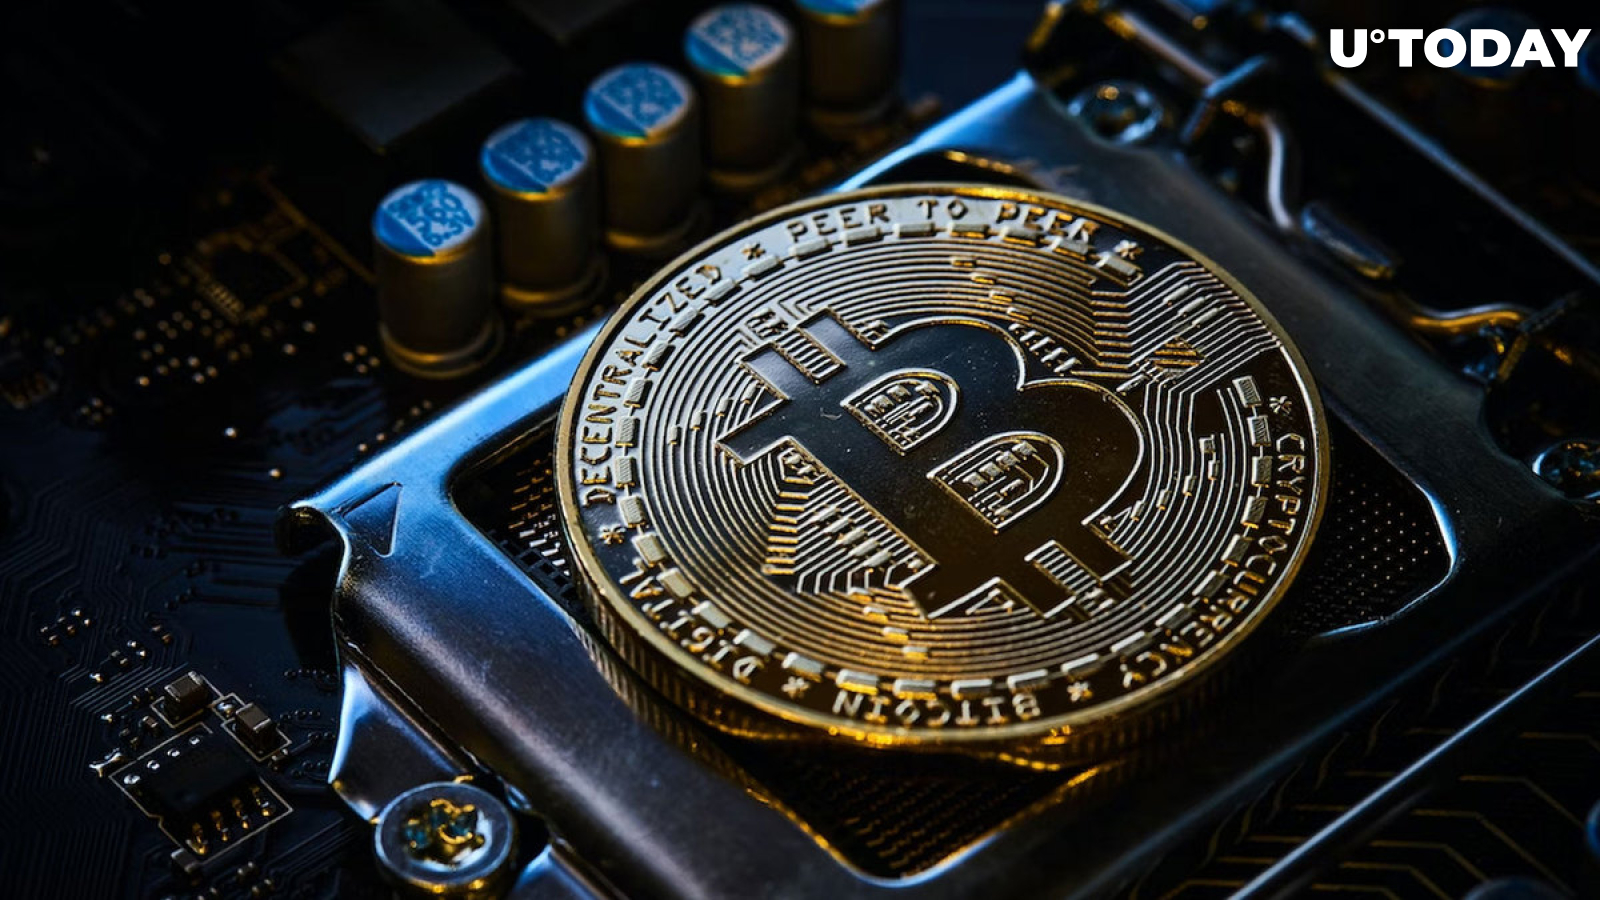 3 Key Things to Watch for on Bitcoin as It Hangs Between $30,000 and Potential $25,000 Revisit